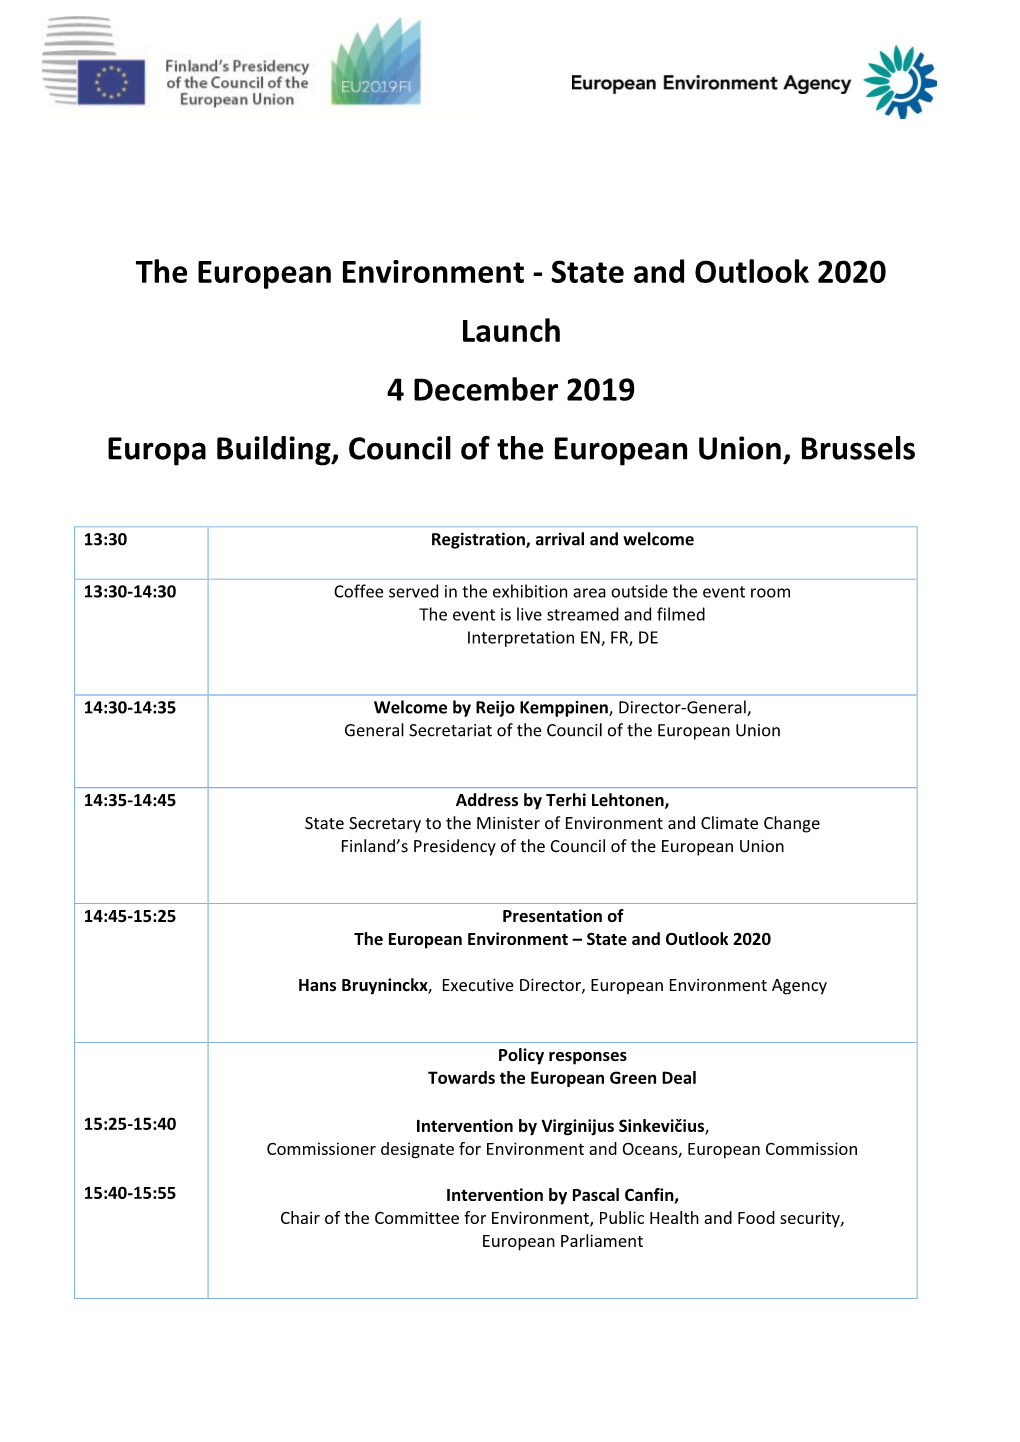 The European Environment - State and Outlook 2020 Launch 4 December 2019